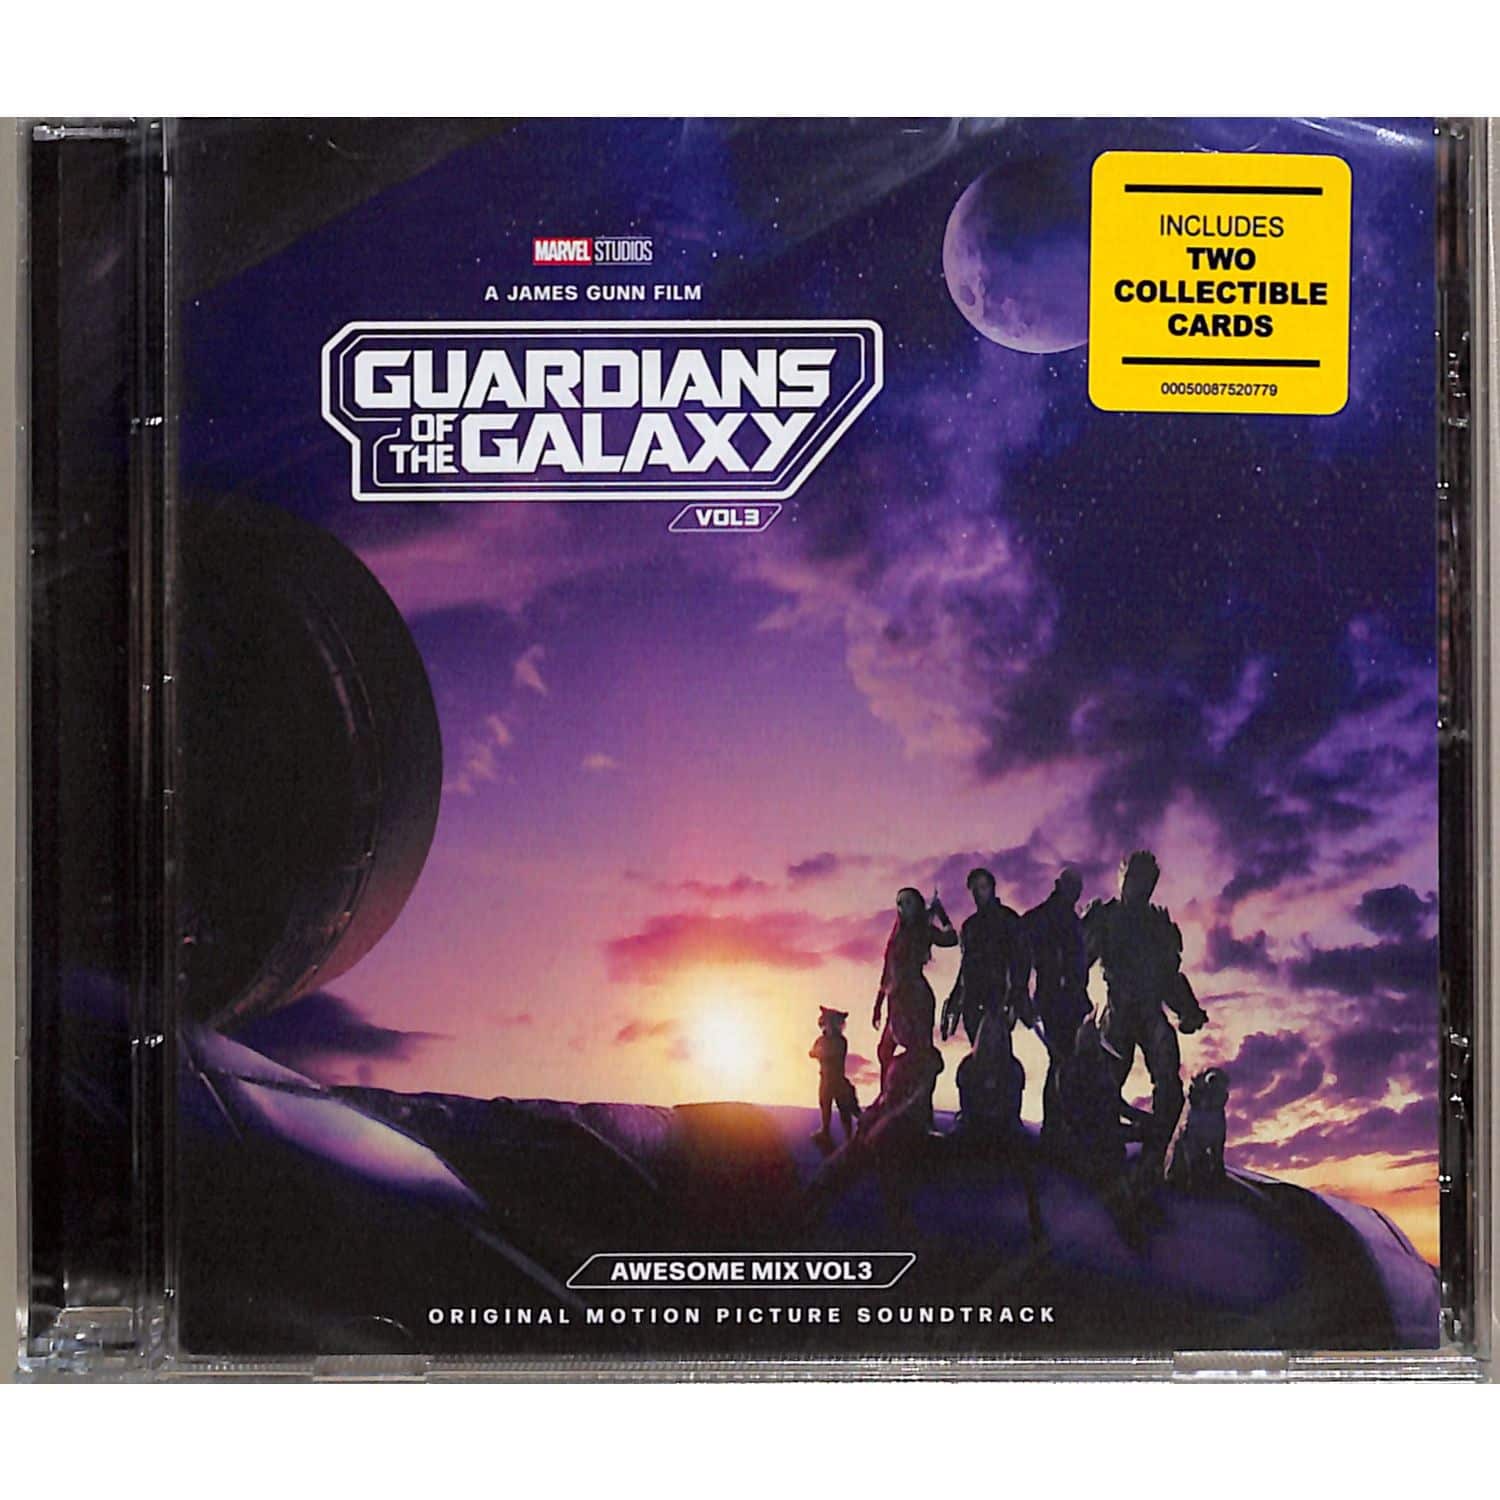 OST / VARIOUS - GUARDIANS OF THE GALAXY VOL.3: AWESOME MIX VOL.3 